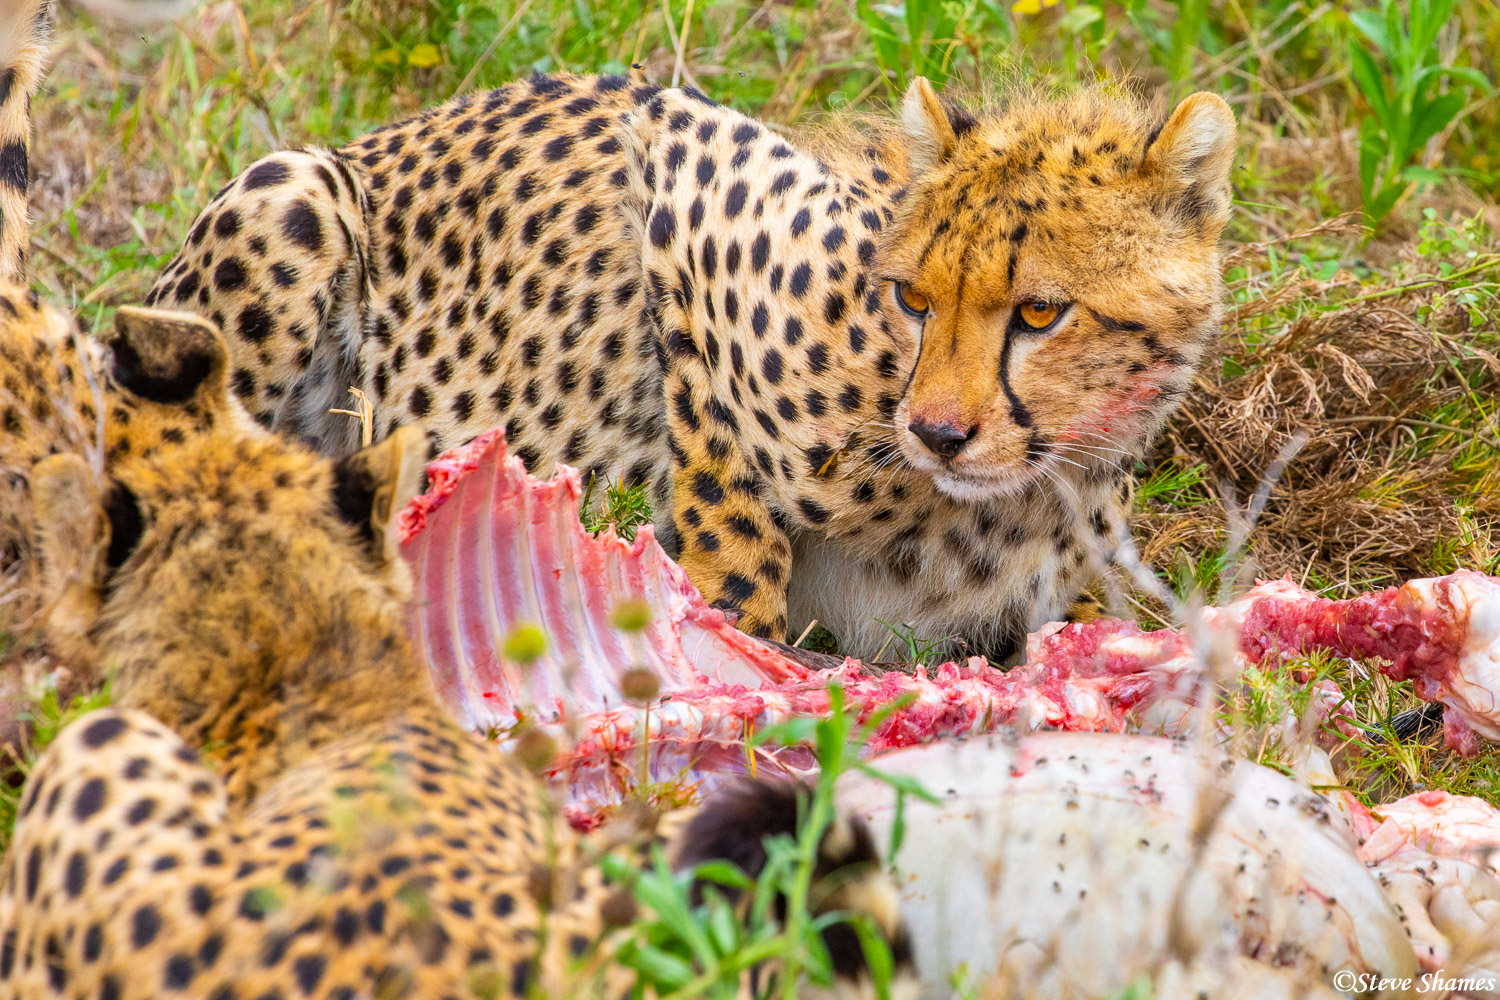 These cheetahs are taking nice bites out of these wildebeest ribs.